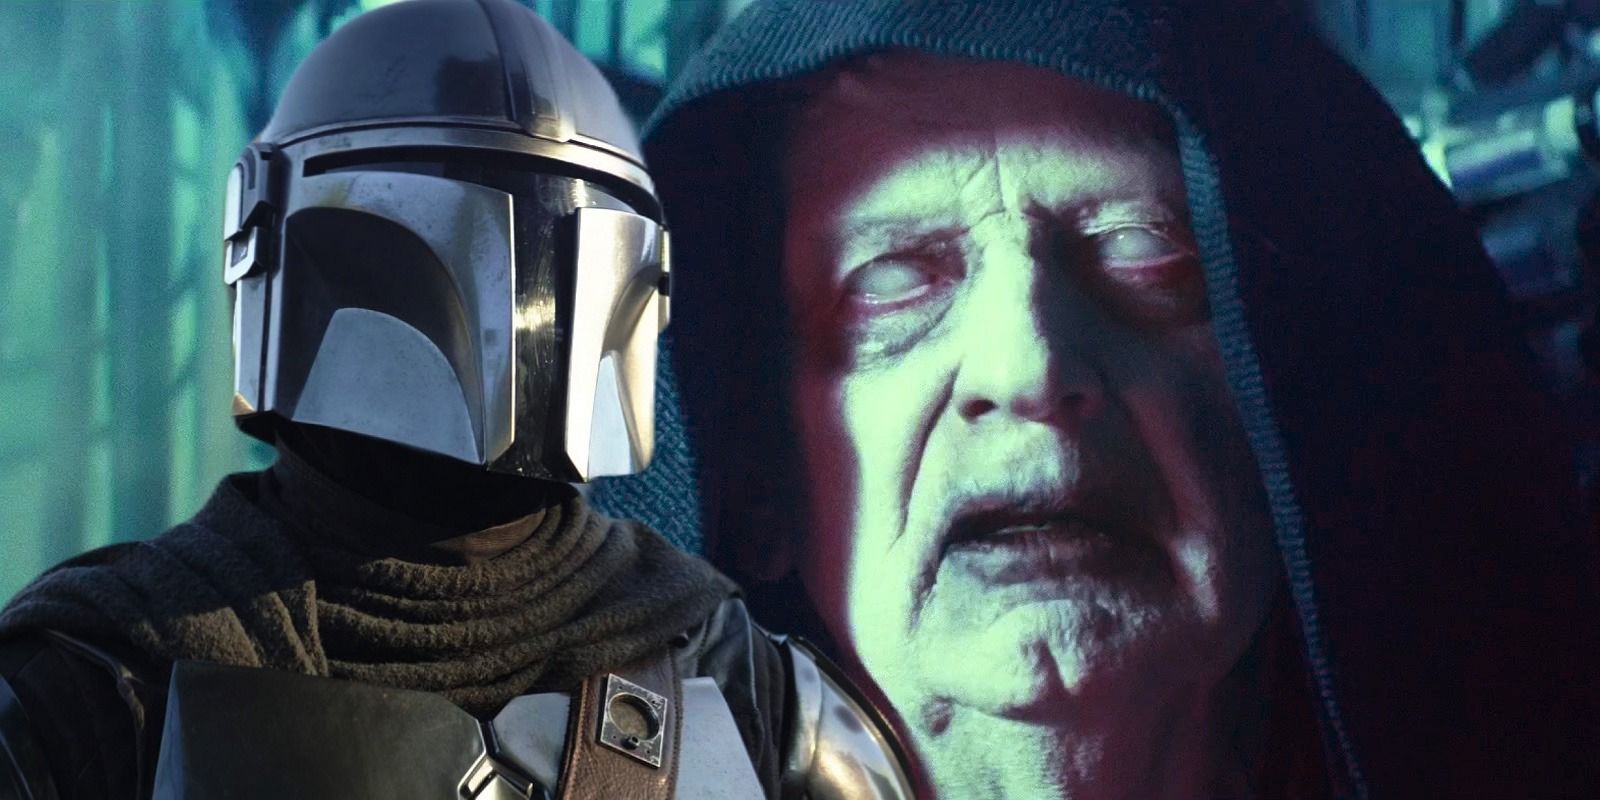 Din Djarin from The Mandalorian season 3 to the left and Zombie Palpatine from The Rise of Skywalker to the right